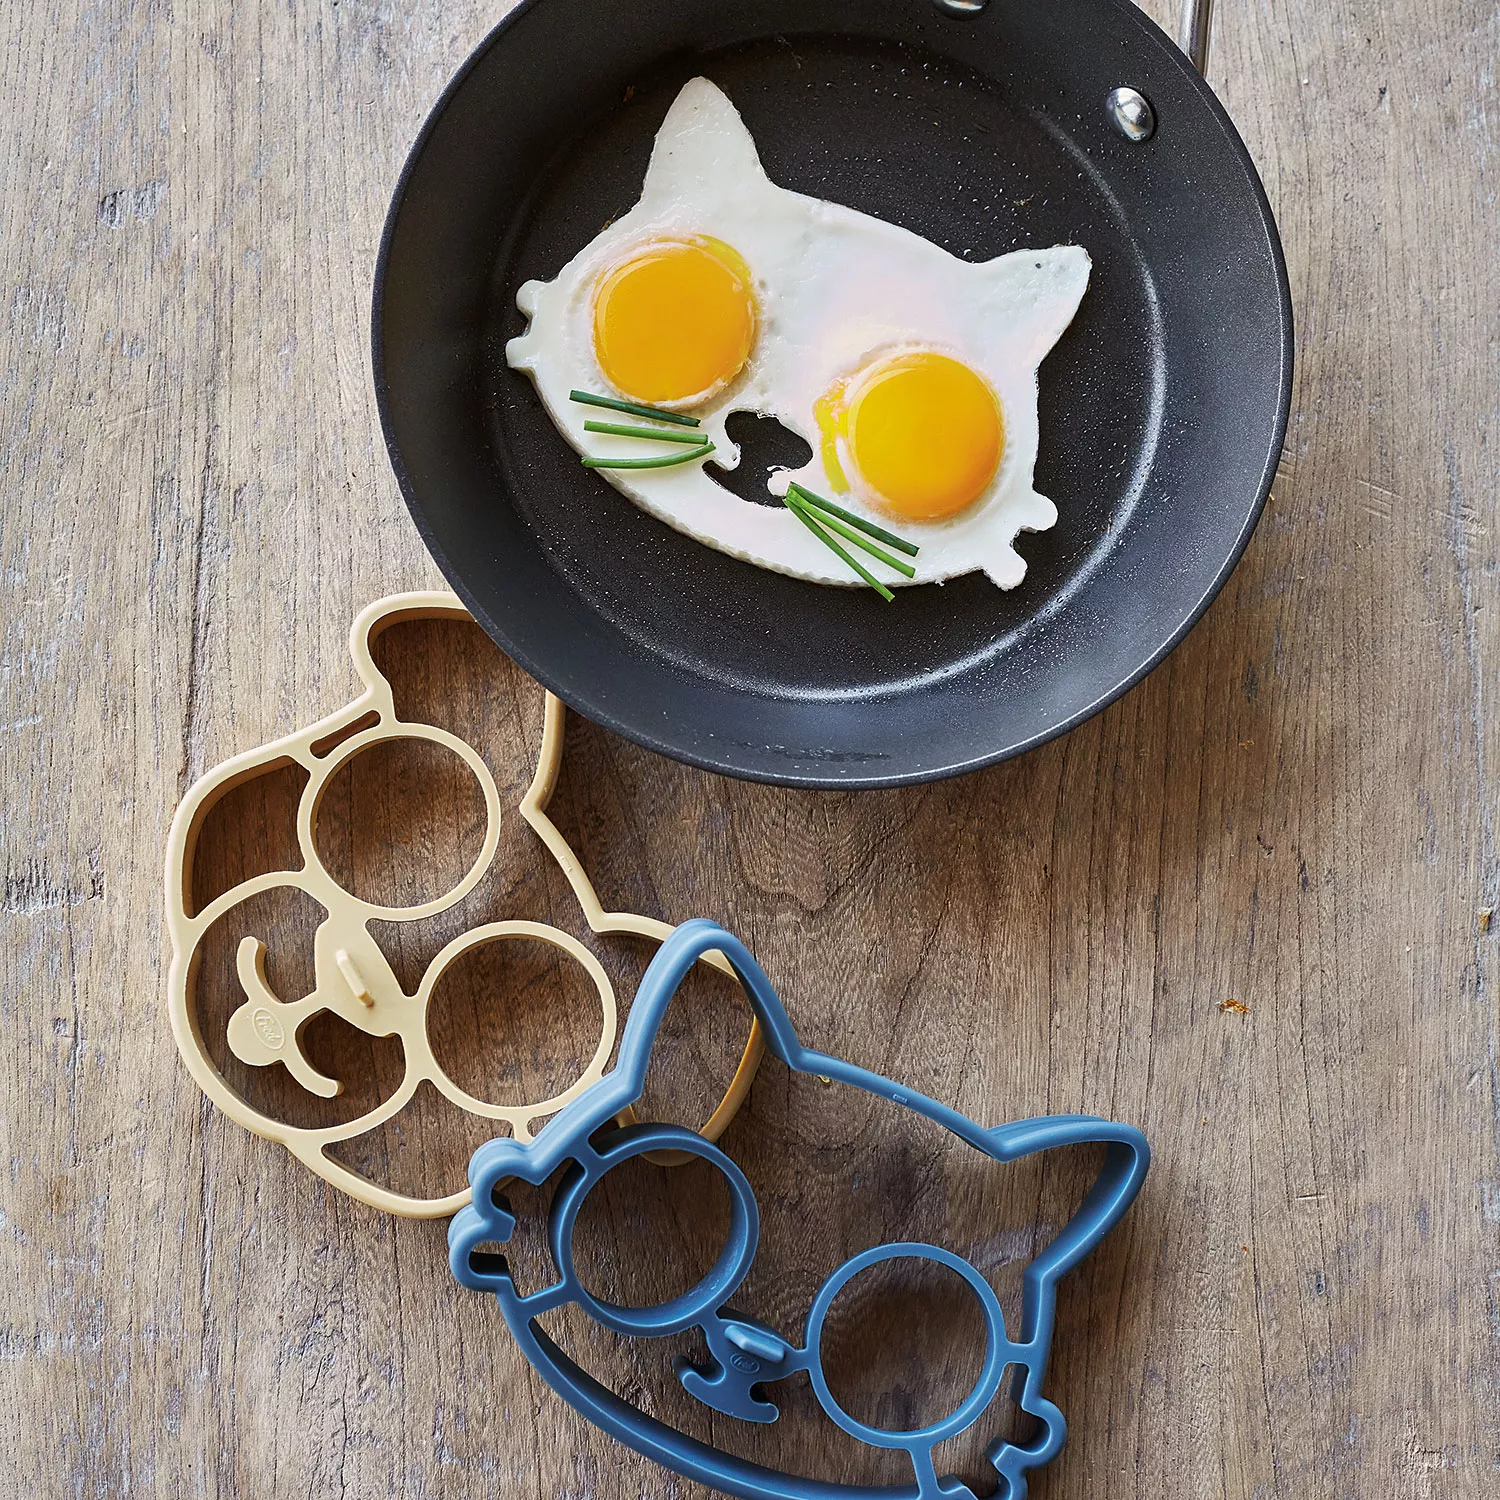 Cat-Shaped Egg Mold Lets You Make Breakfast Kitty-Side Up